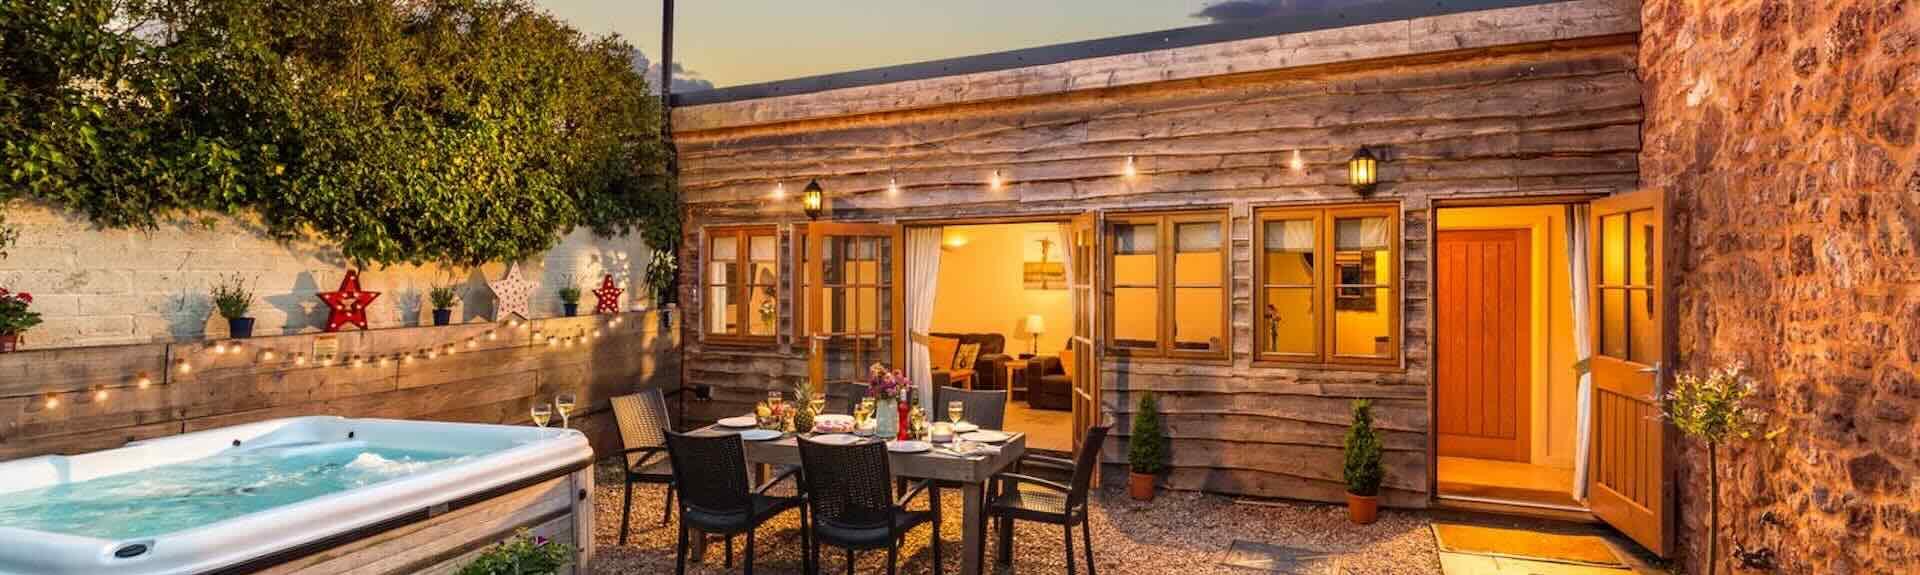 A wood-clad single-storey Somerset holiday cottage with a table laid for dinner in a courtyard at dusk.